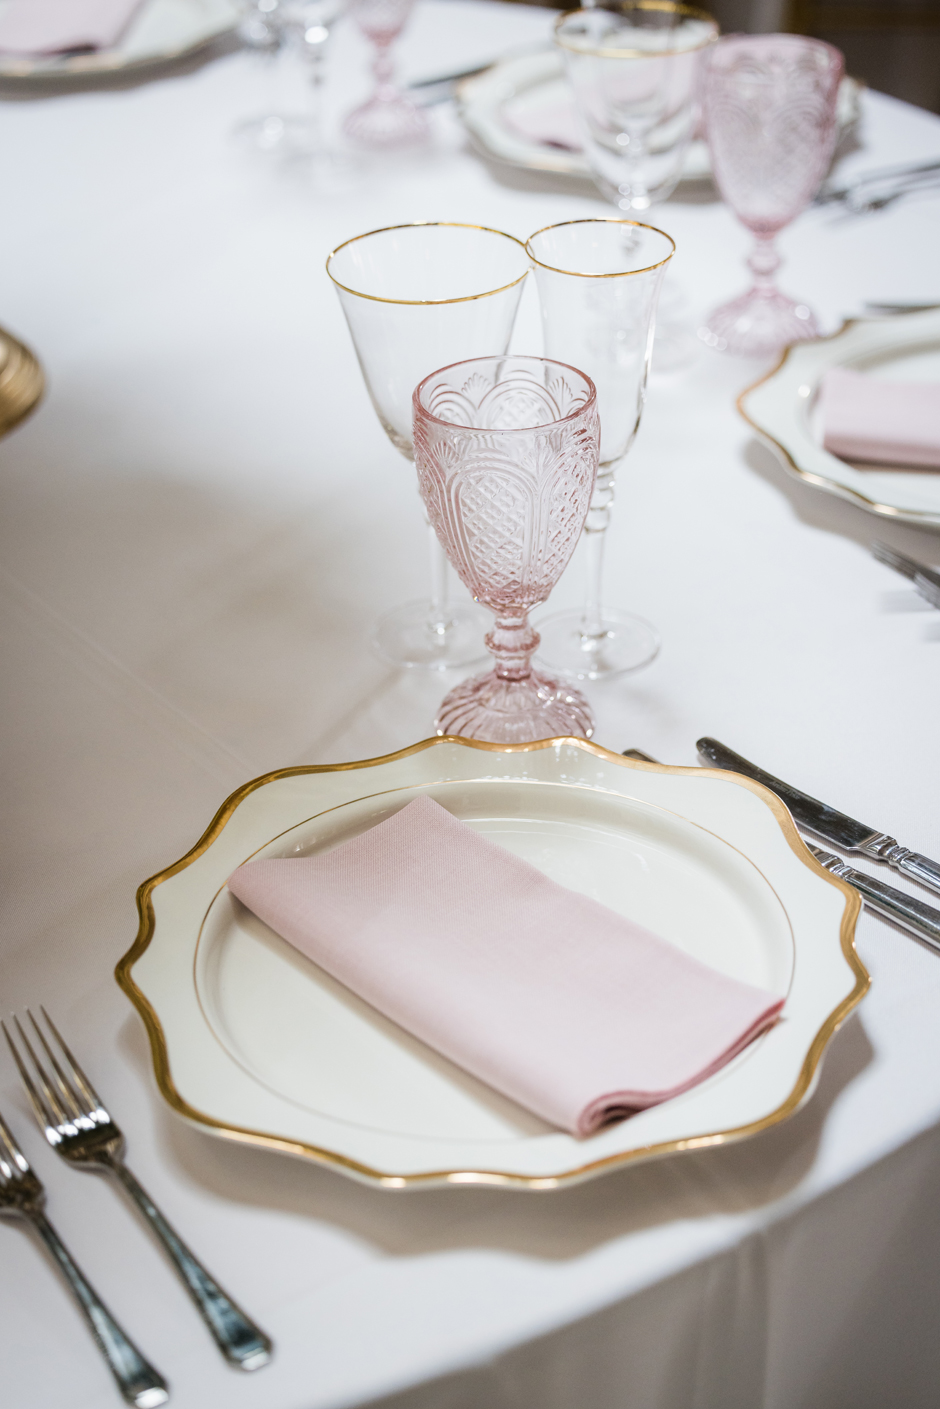 Gold trim Porcelain charger plate with white Essential linen, peony Gelato napkin, gold trim glasses & pink goblet.